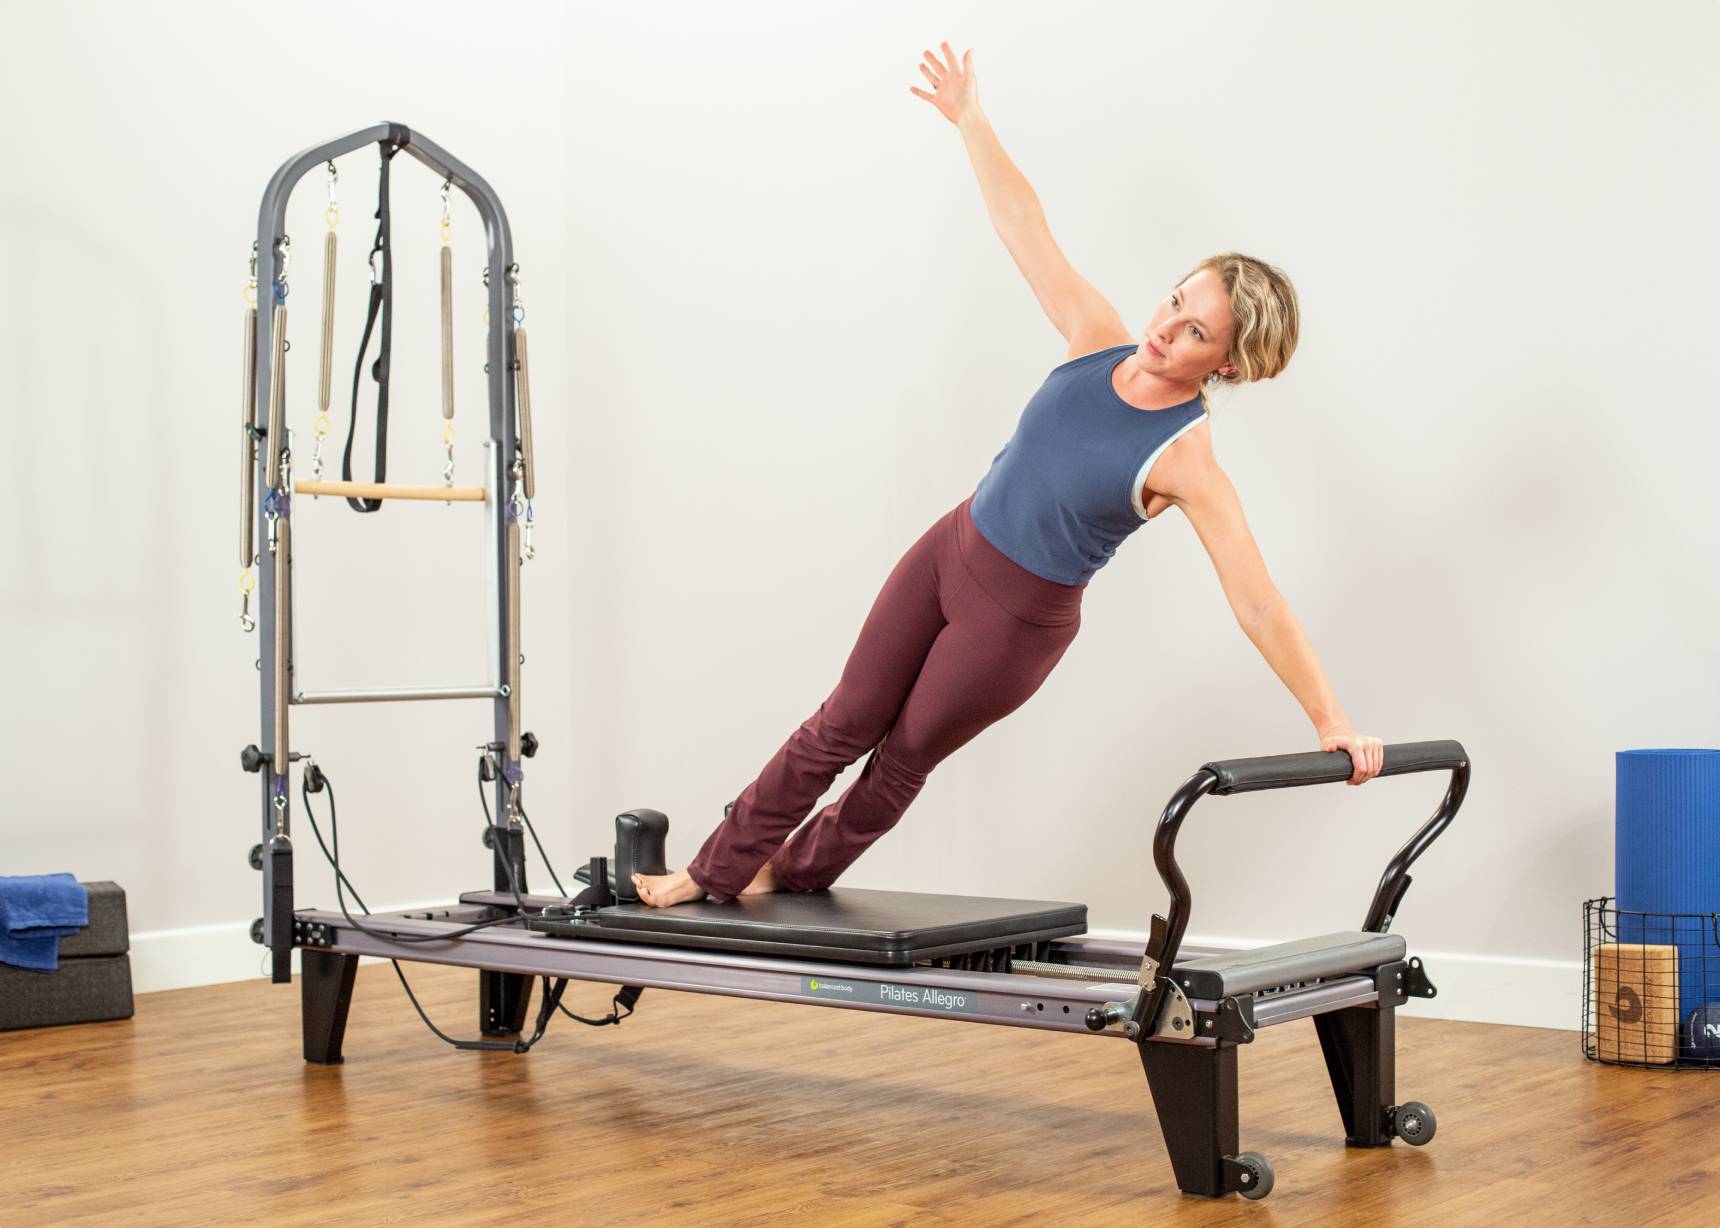 Pilates Tower Class, Centered Pilates and Fitness, Inc